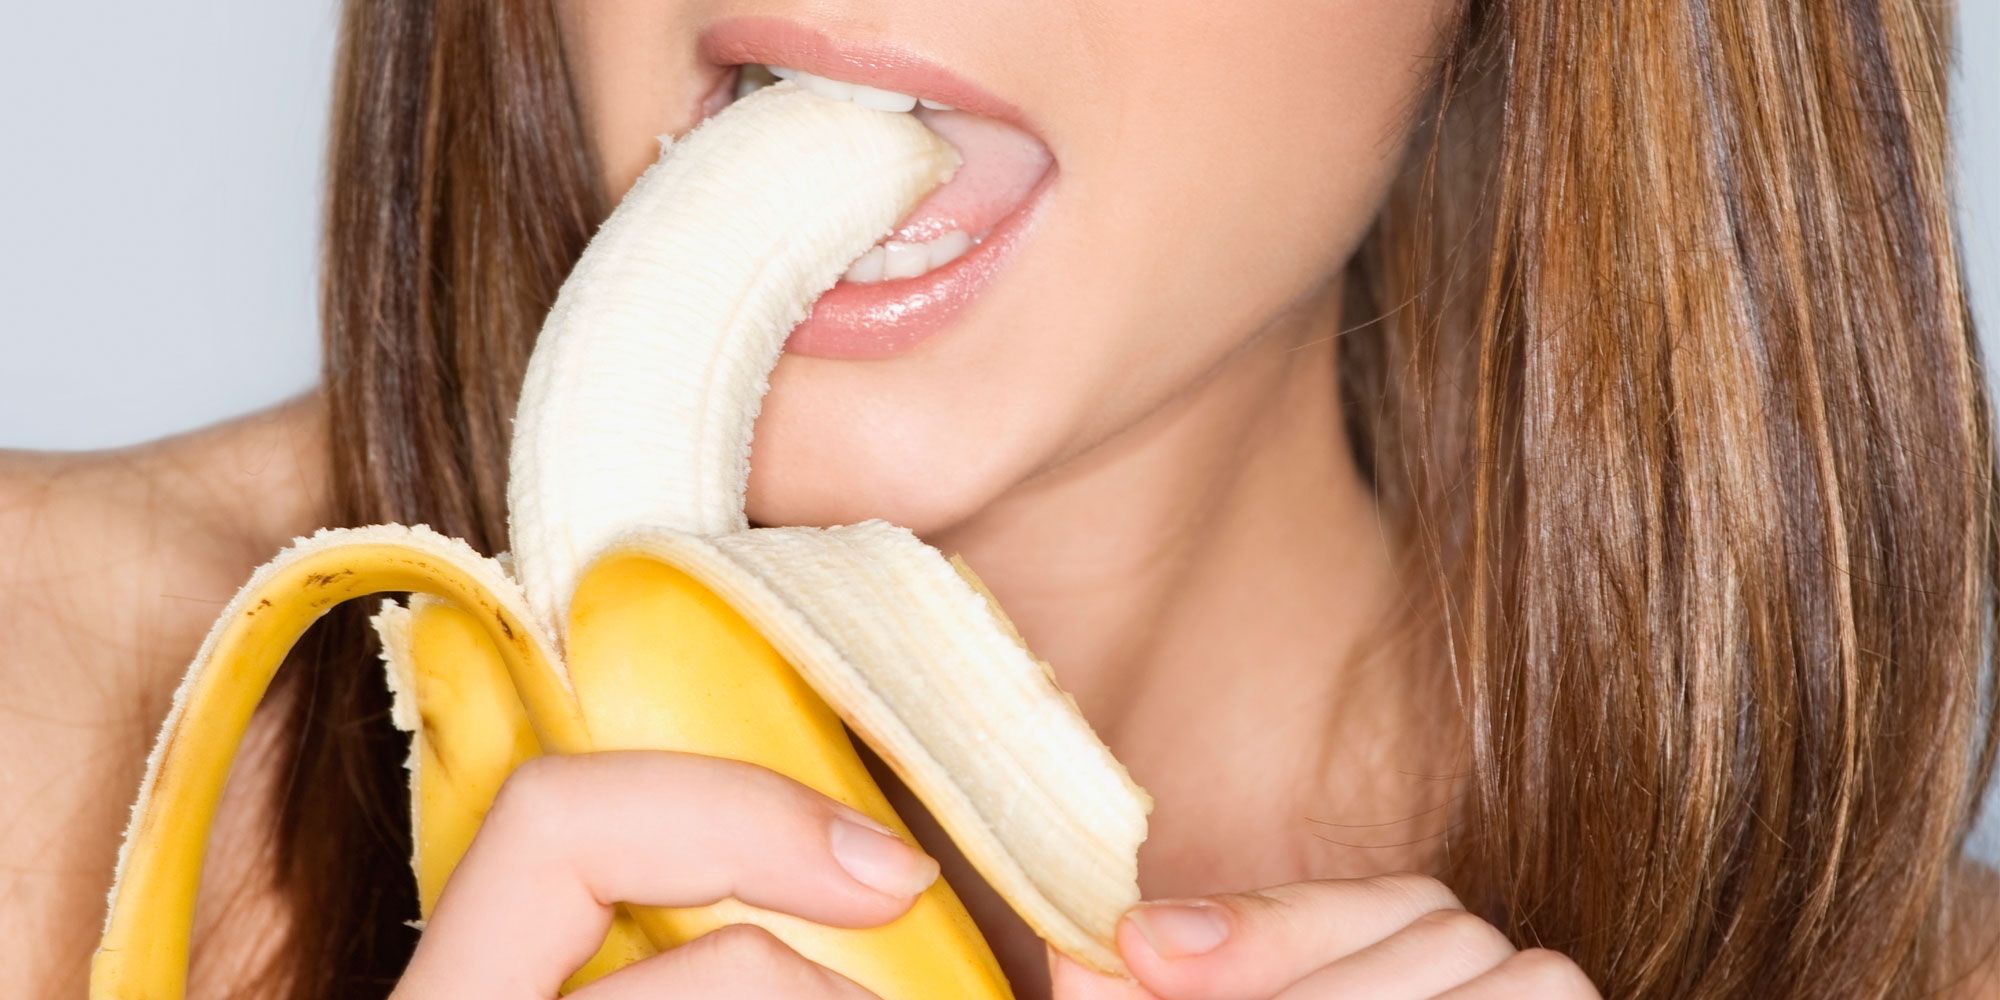 11 Things Women Wish Guys Knew About Giving Blow Jobs pic